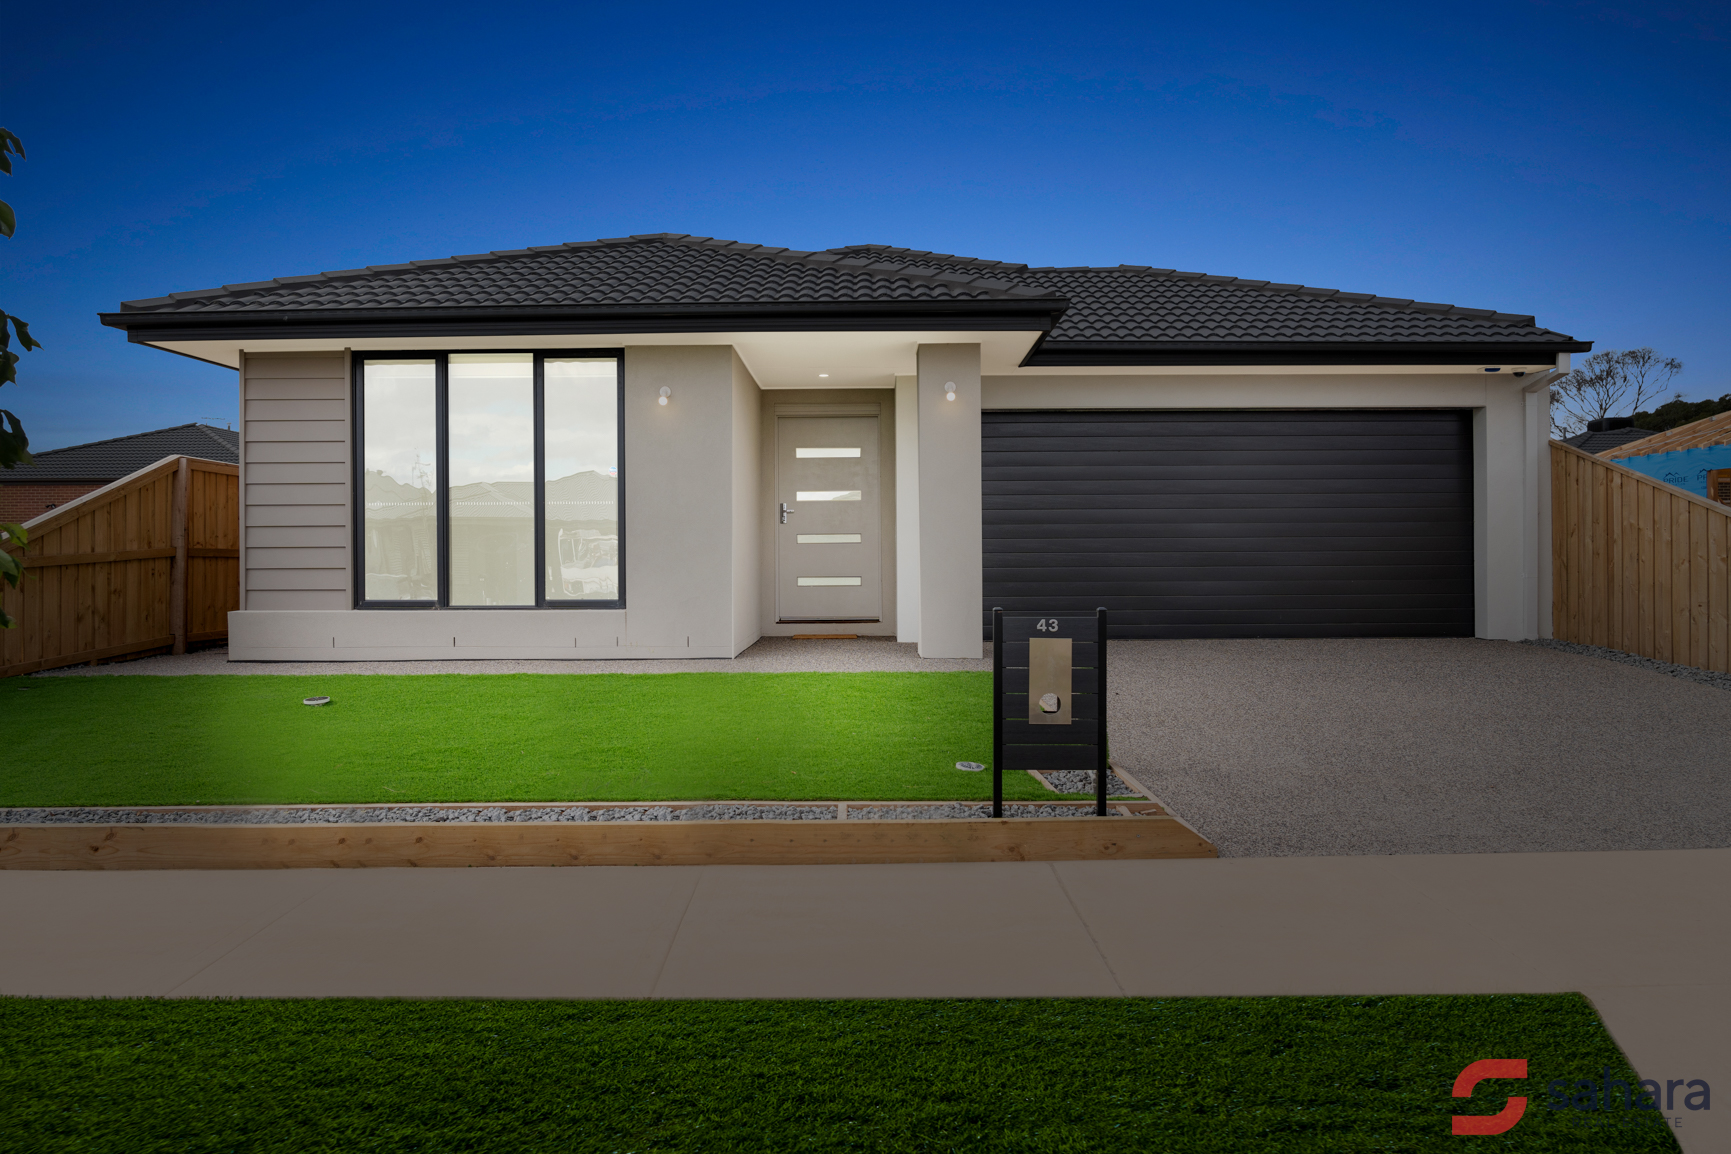 Sold House 43 Cherish Street, Fraser Rise VIC 3336 - May 24, 2023 - Homely